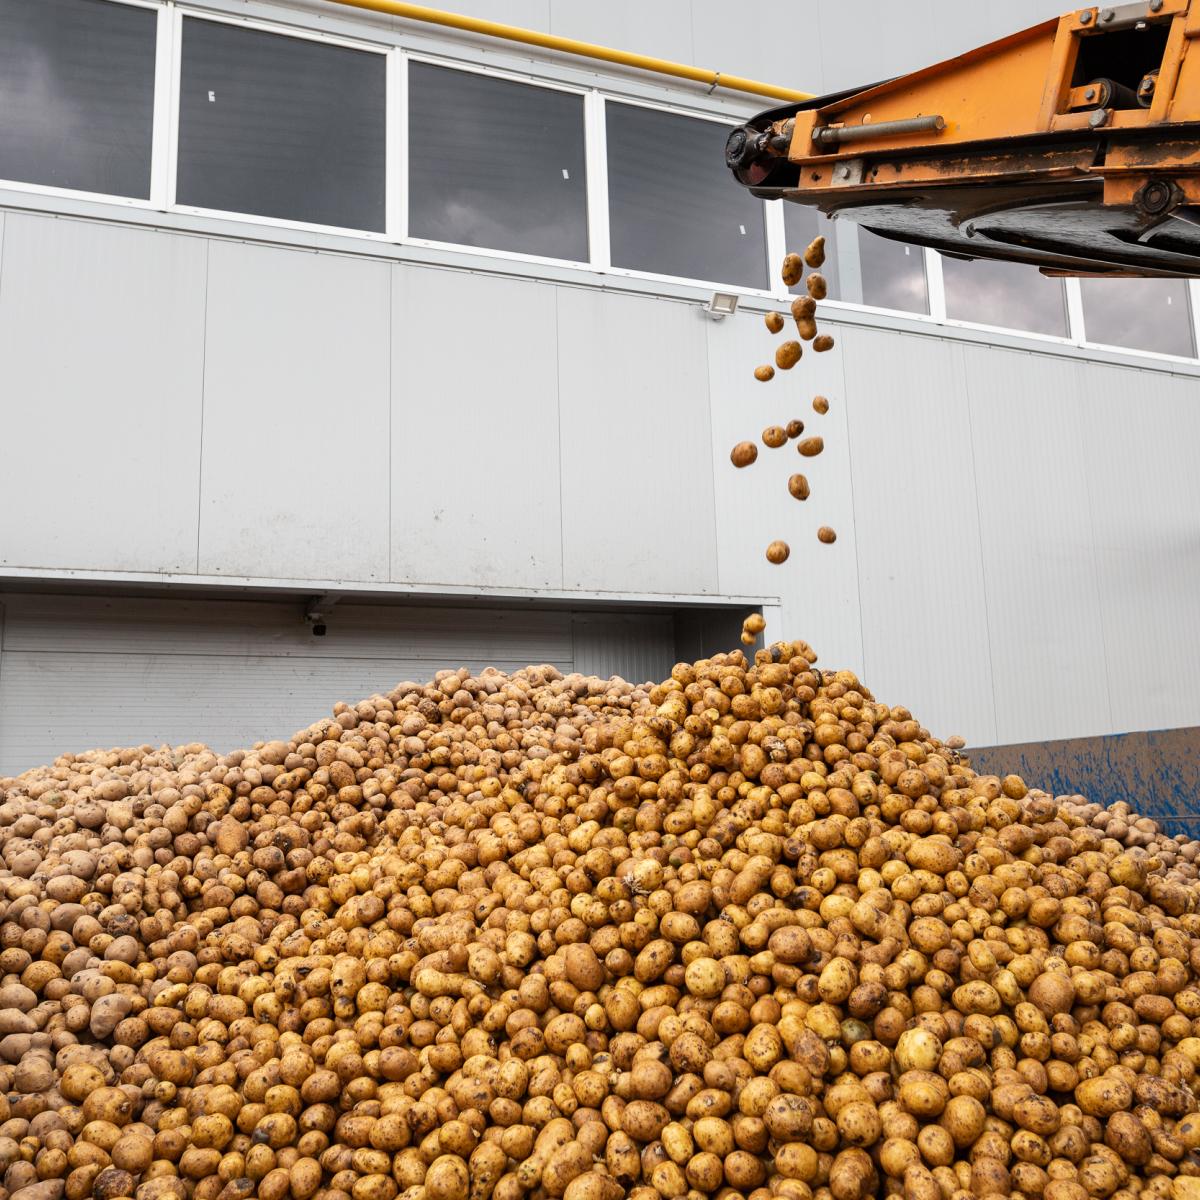 Incoming potatoes are washed and sorted in batches